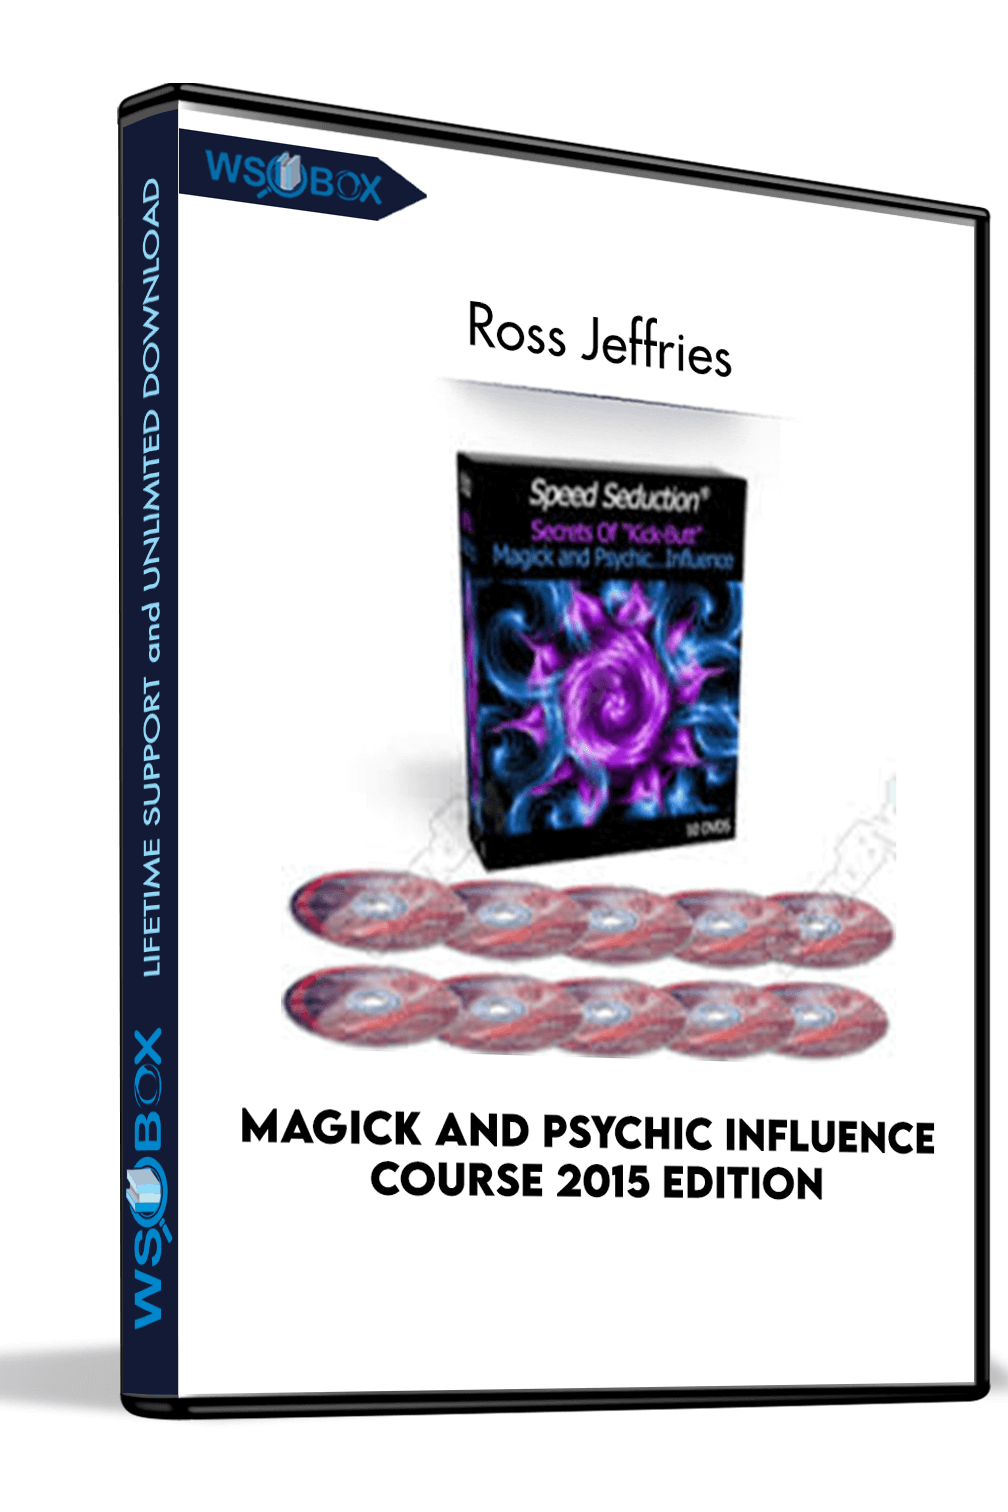 magick-and-psychic-influence-course-2015-edition-ross-jeffries